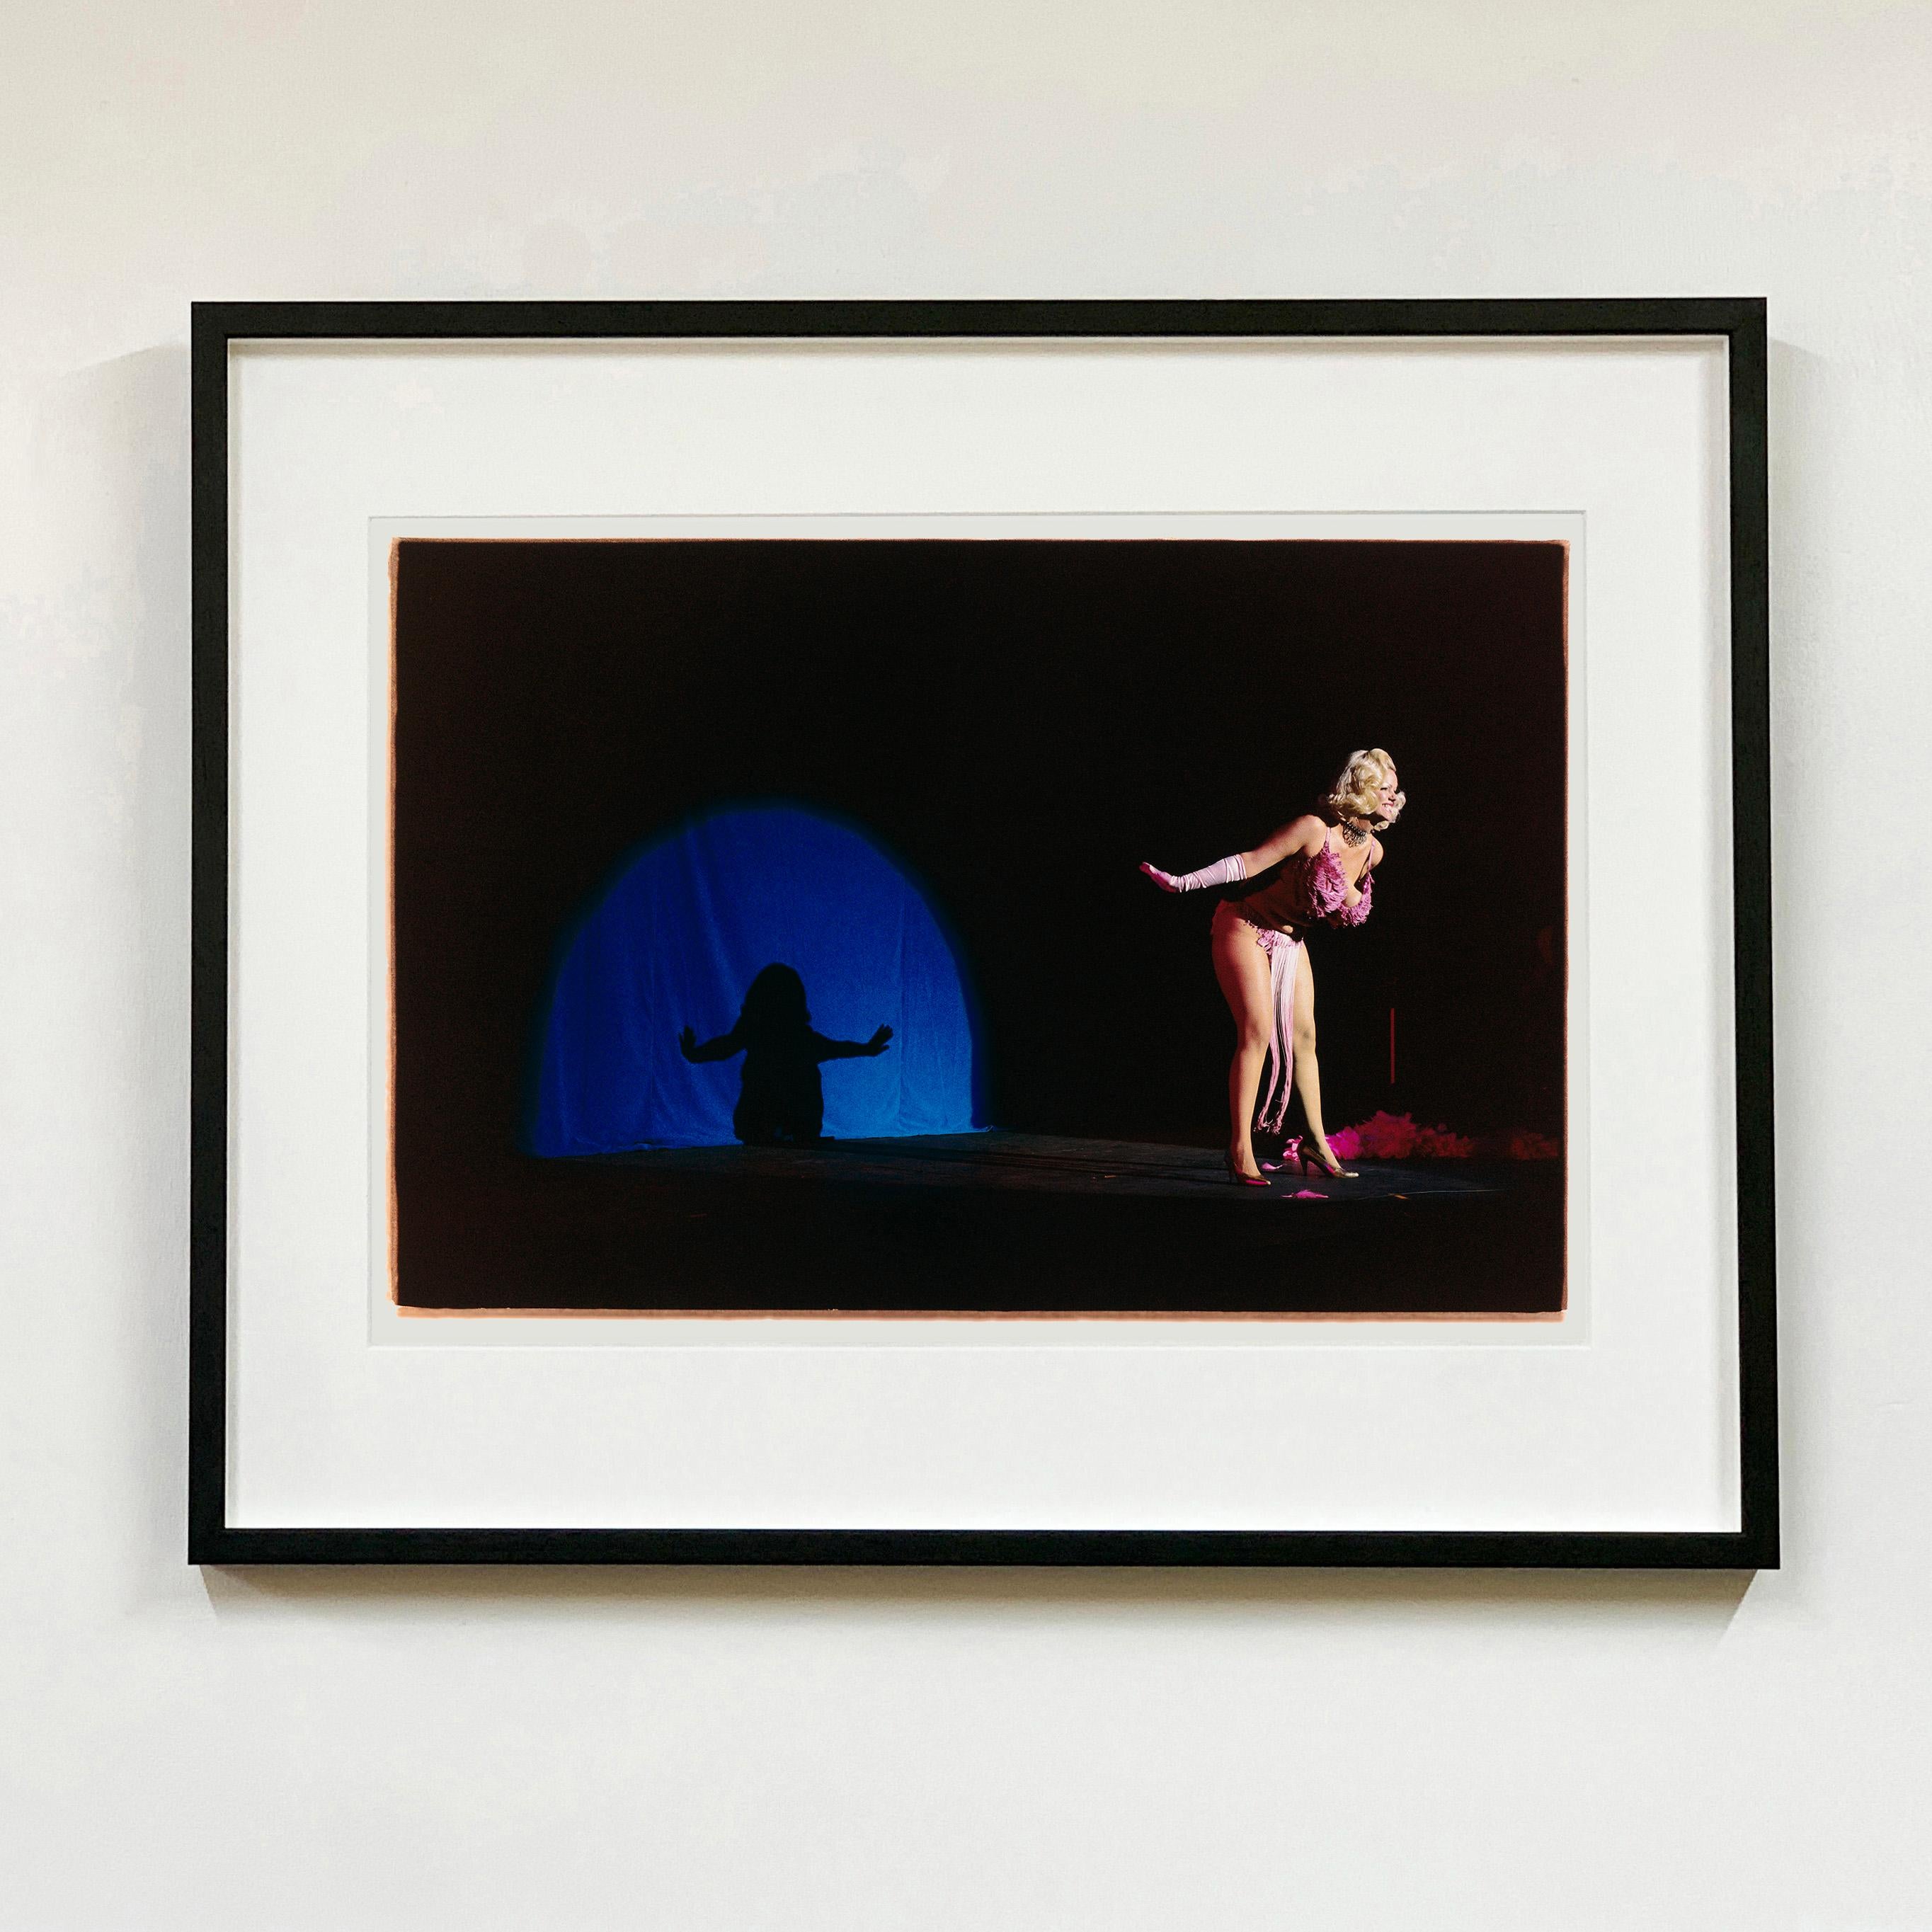 The World Famous Bob, photograph capturing their Burlesque performance in Hollywood, LA. Richard Heeps became well-known for his Burlesque photography as he captured performances in Britain & America. Spending a lot of time with his subjects on a